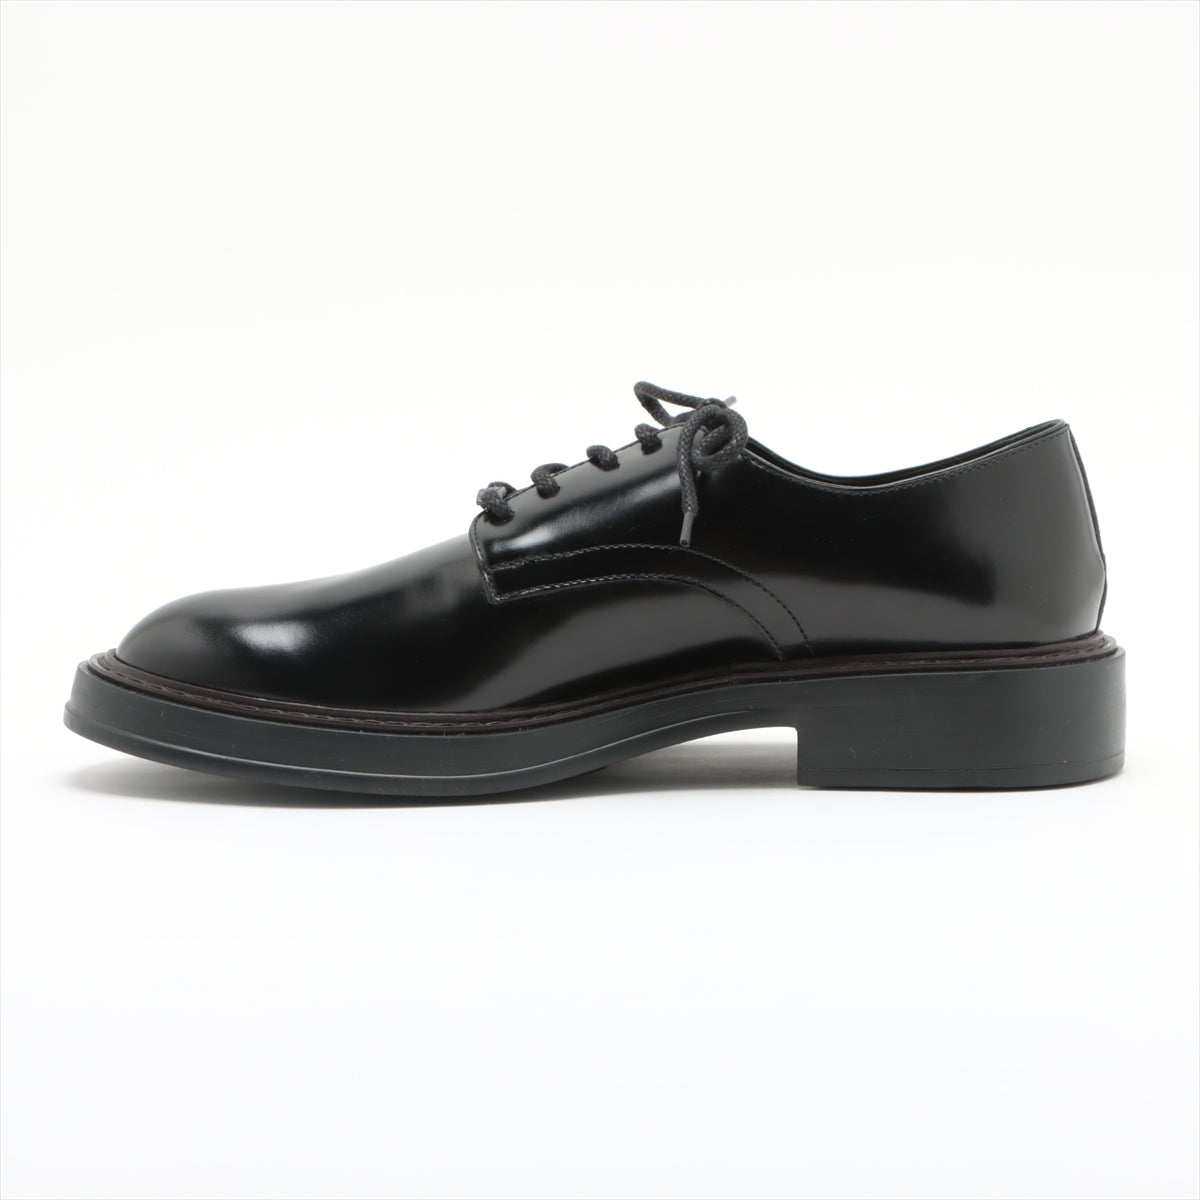 Tod's Leather Leather shoes 9 Men's Black DERBY PASSAL